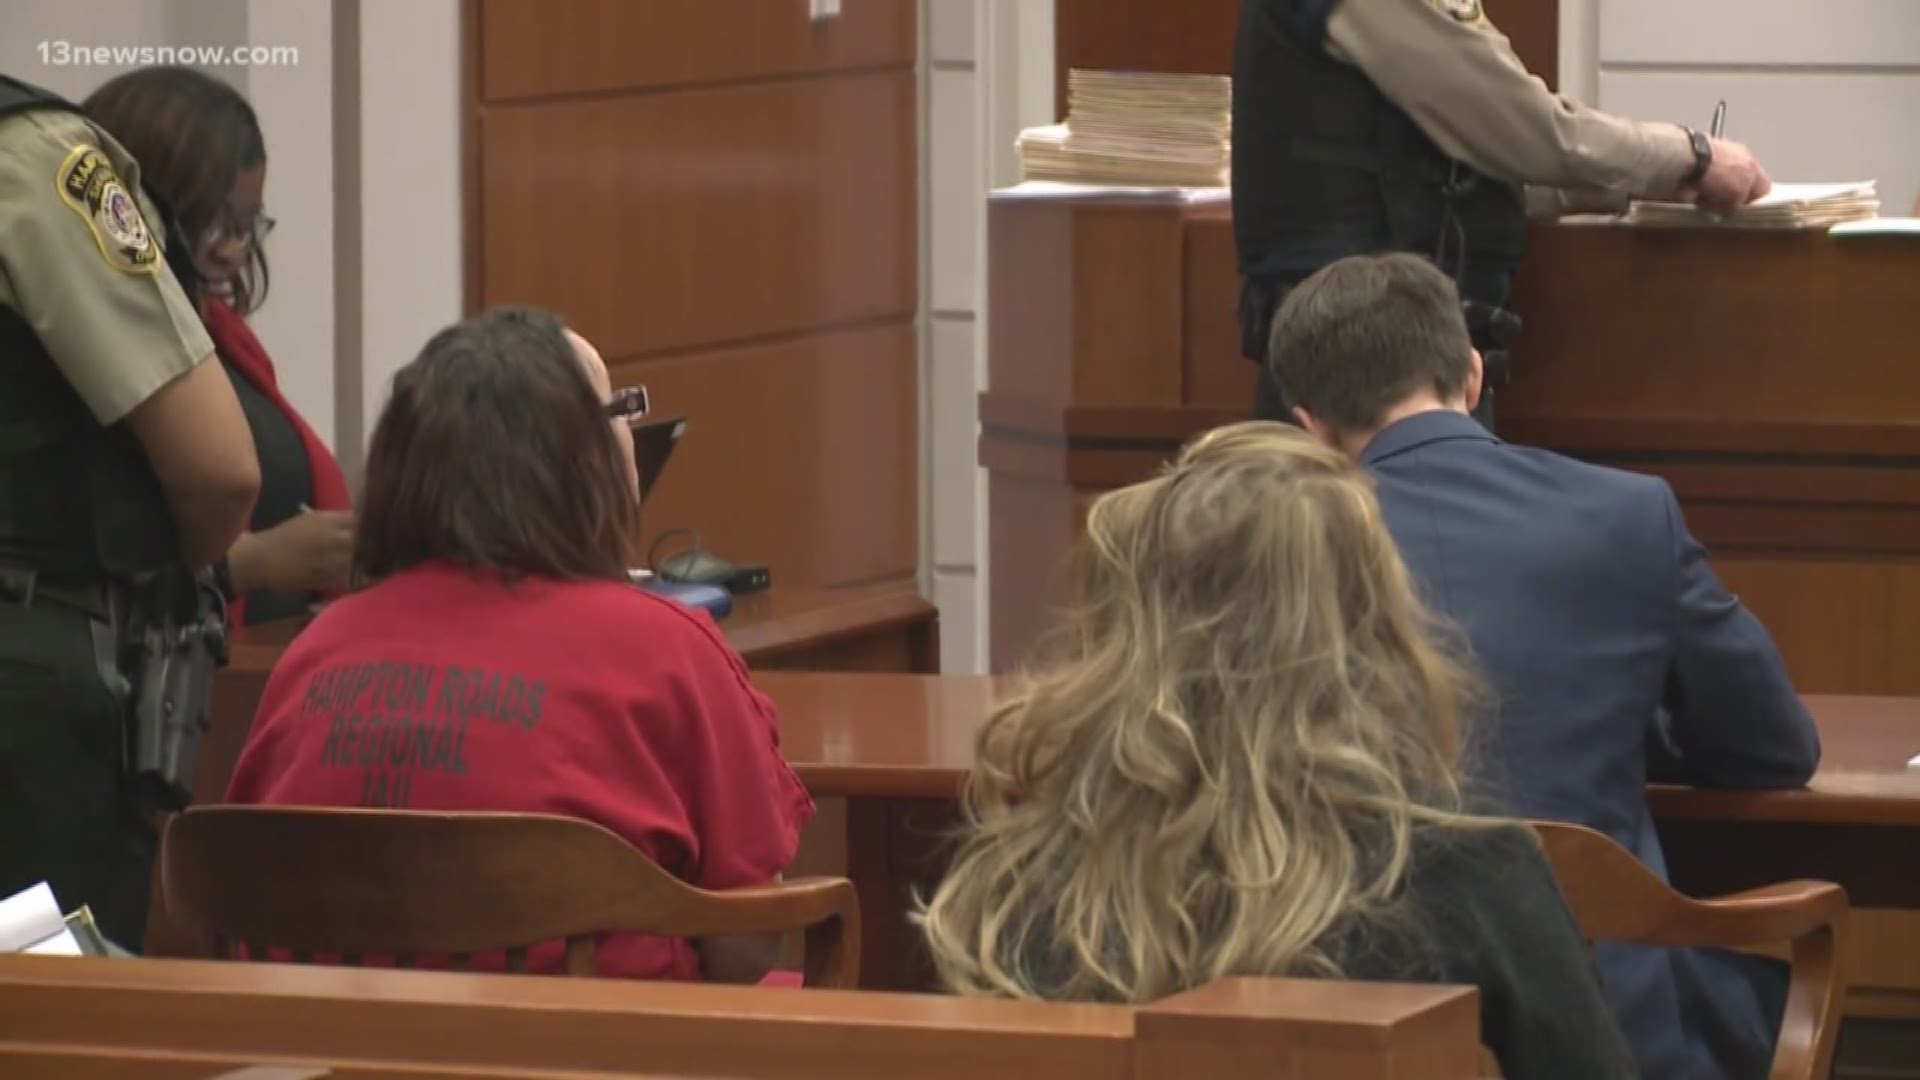 Julia Tomlin appeared in court today for the murder of her son Noah Tomlin and concealing a body. Prosecutors say evidence shows she was in the home when he died.